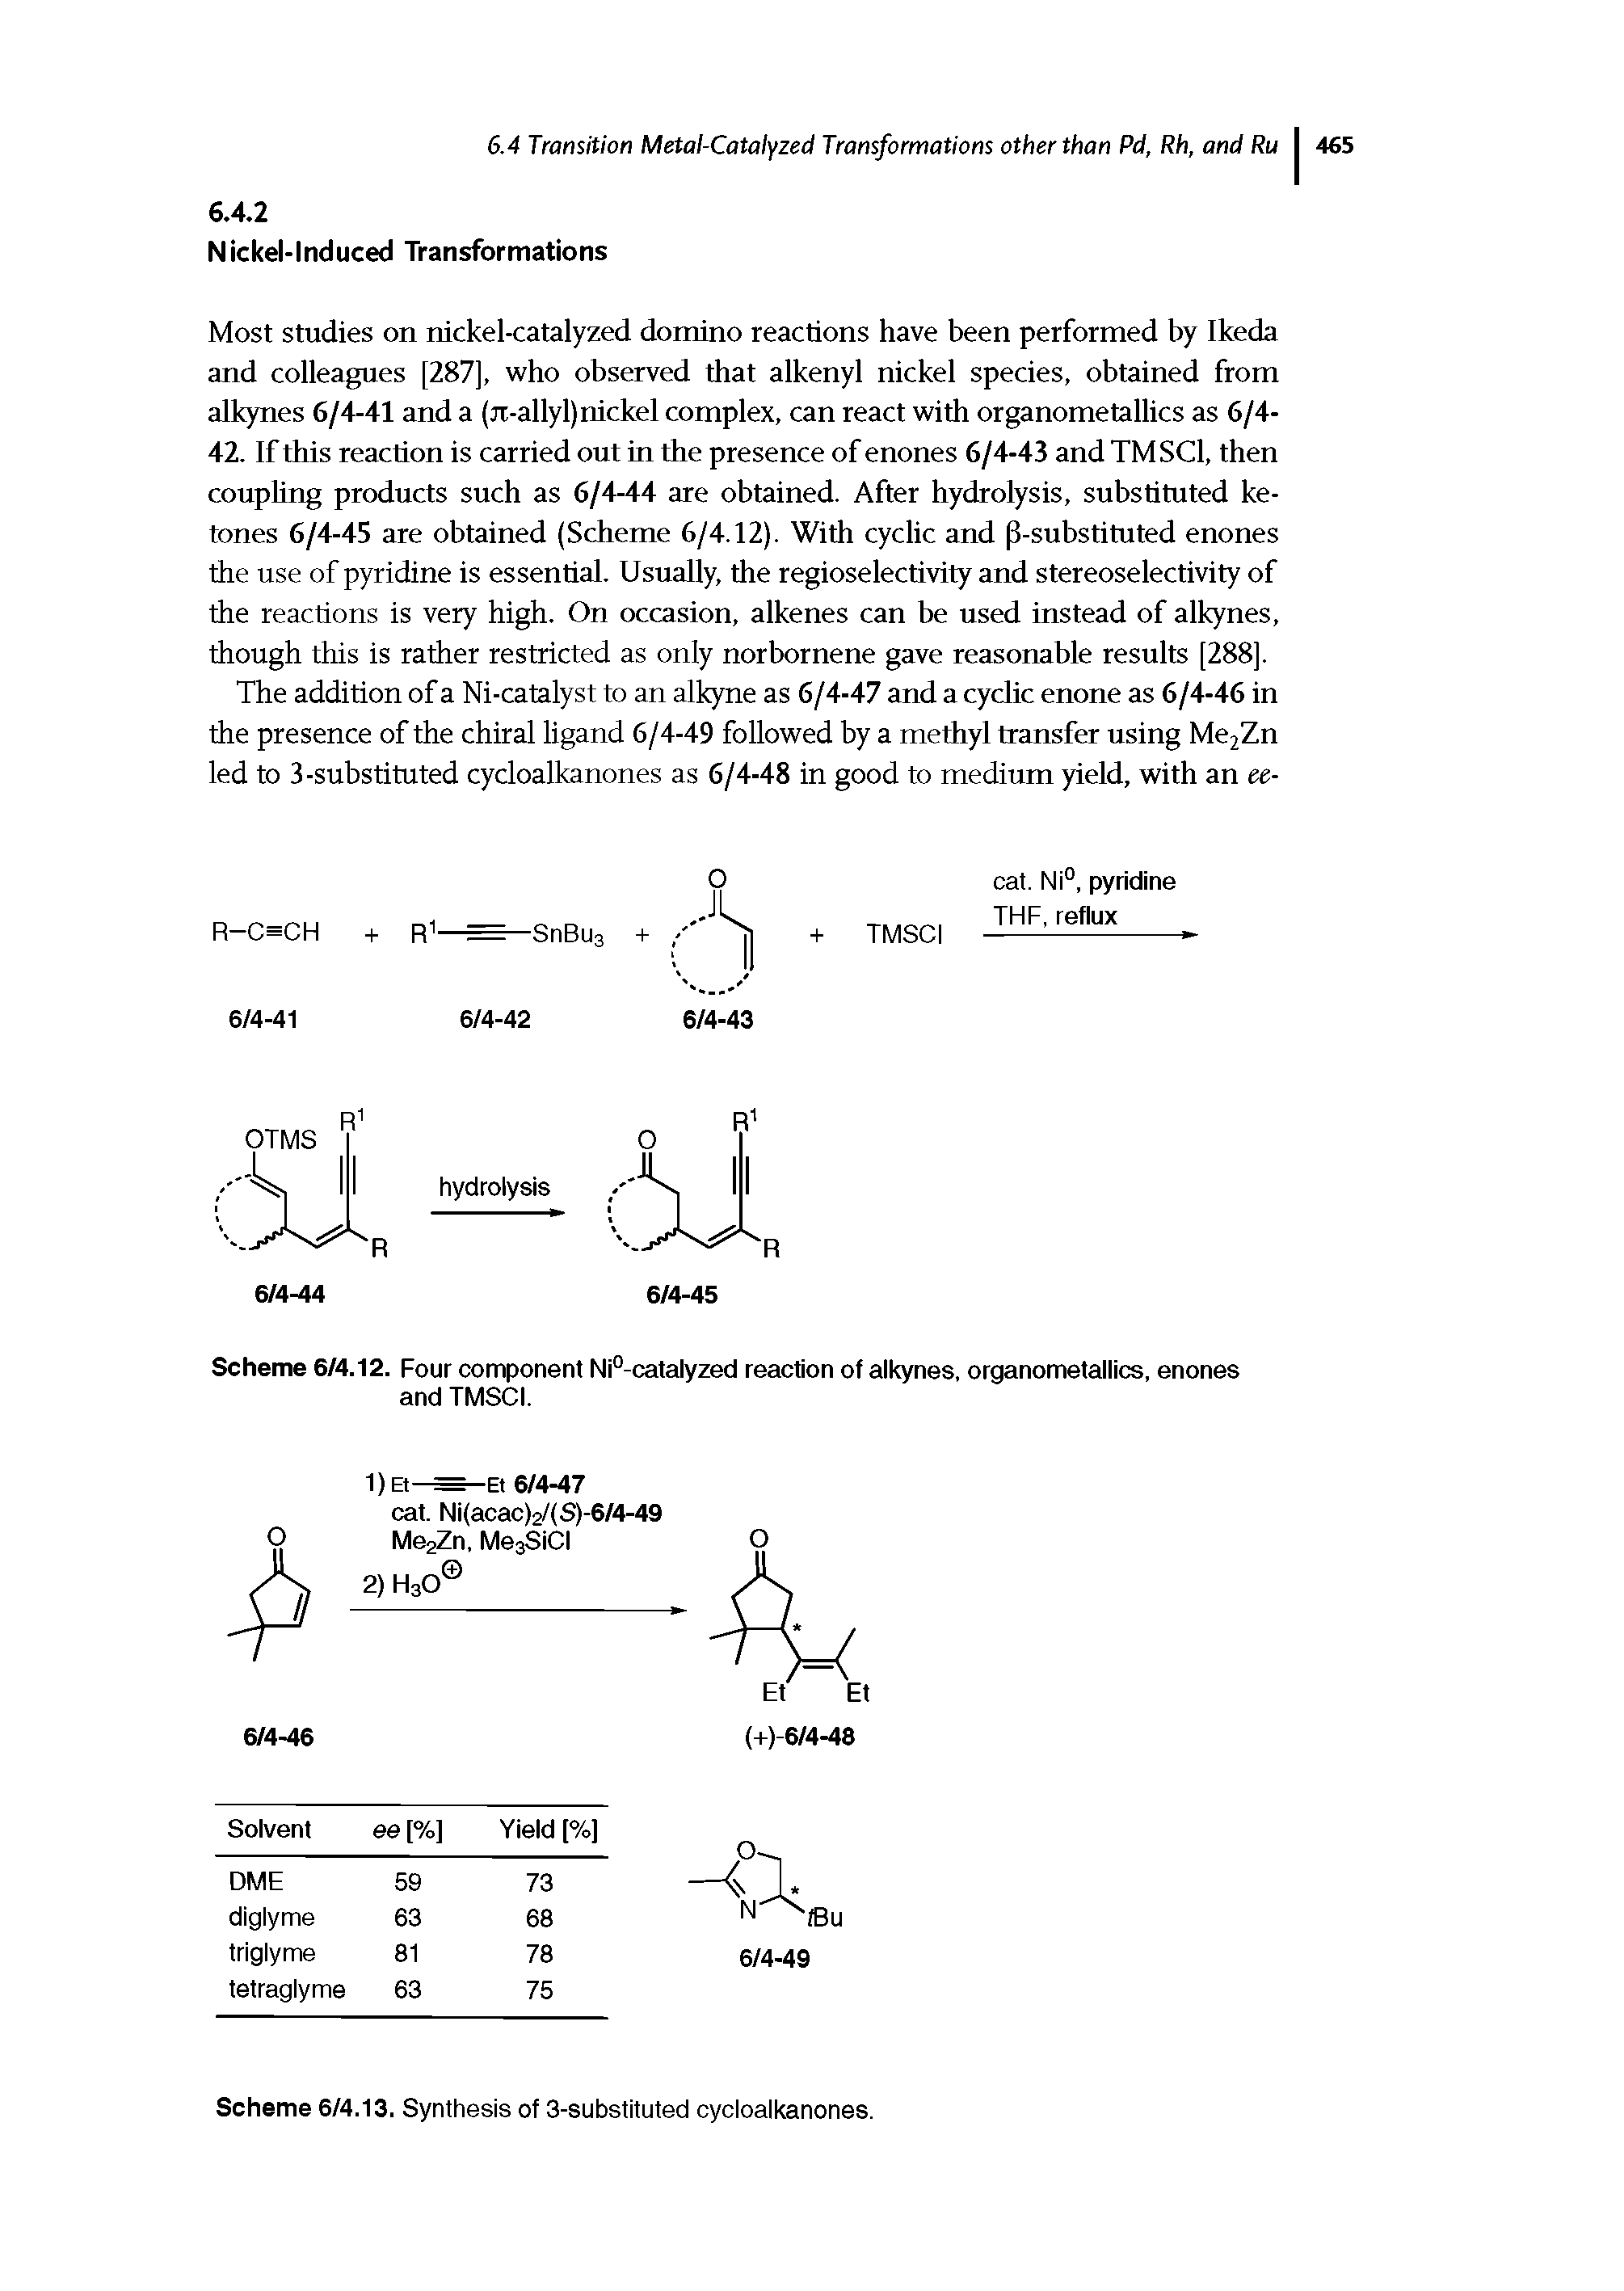 Scheme 6/4.12. Four component Ni°-catalyzed reaction of alkynes, organometallics, enones and TMSCI.